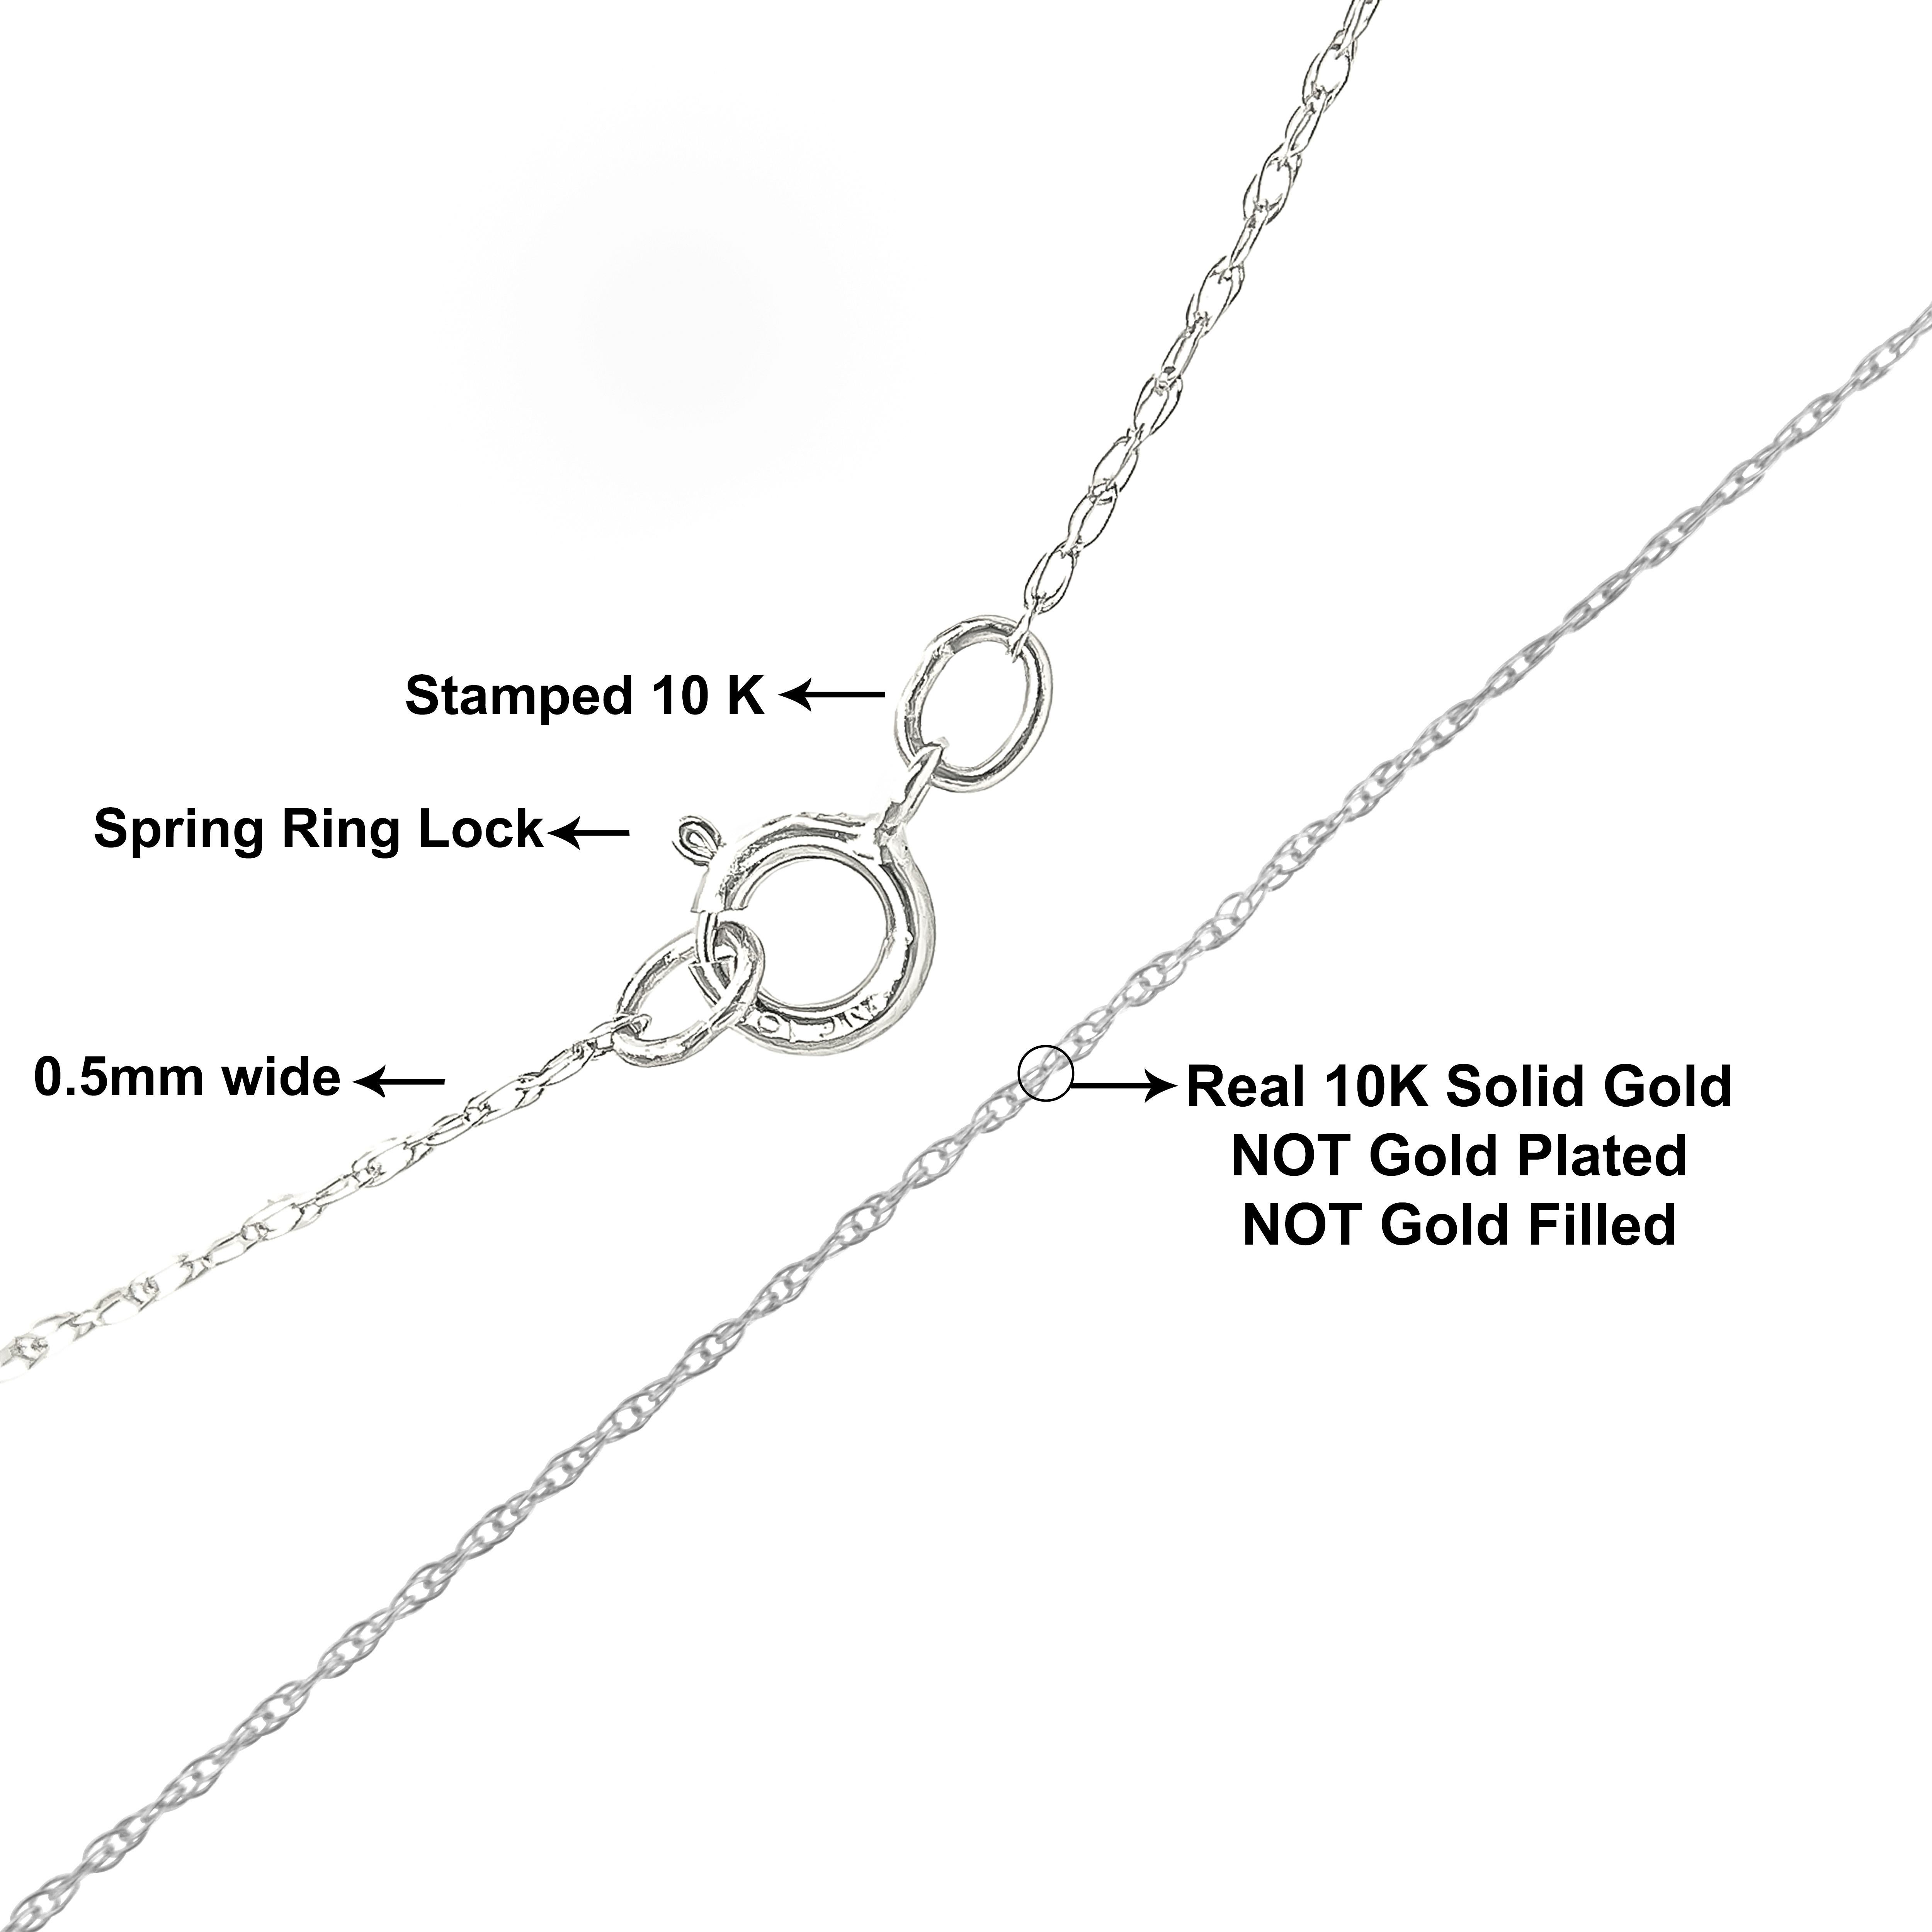 Presenting a feminine classic: a simple and dainty 10K white gold rope chain, available in your choice of 16, 18 or 20 inches. This thin, 1/2-millimeter wide chain fastens securely with a standard spring ring clasp. It can replace most chains and is